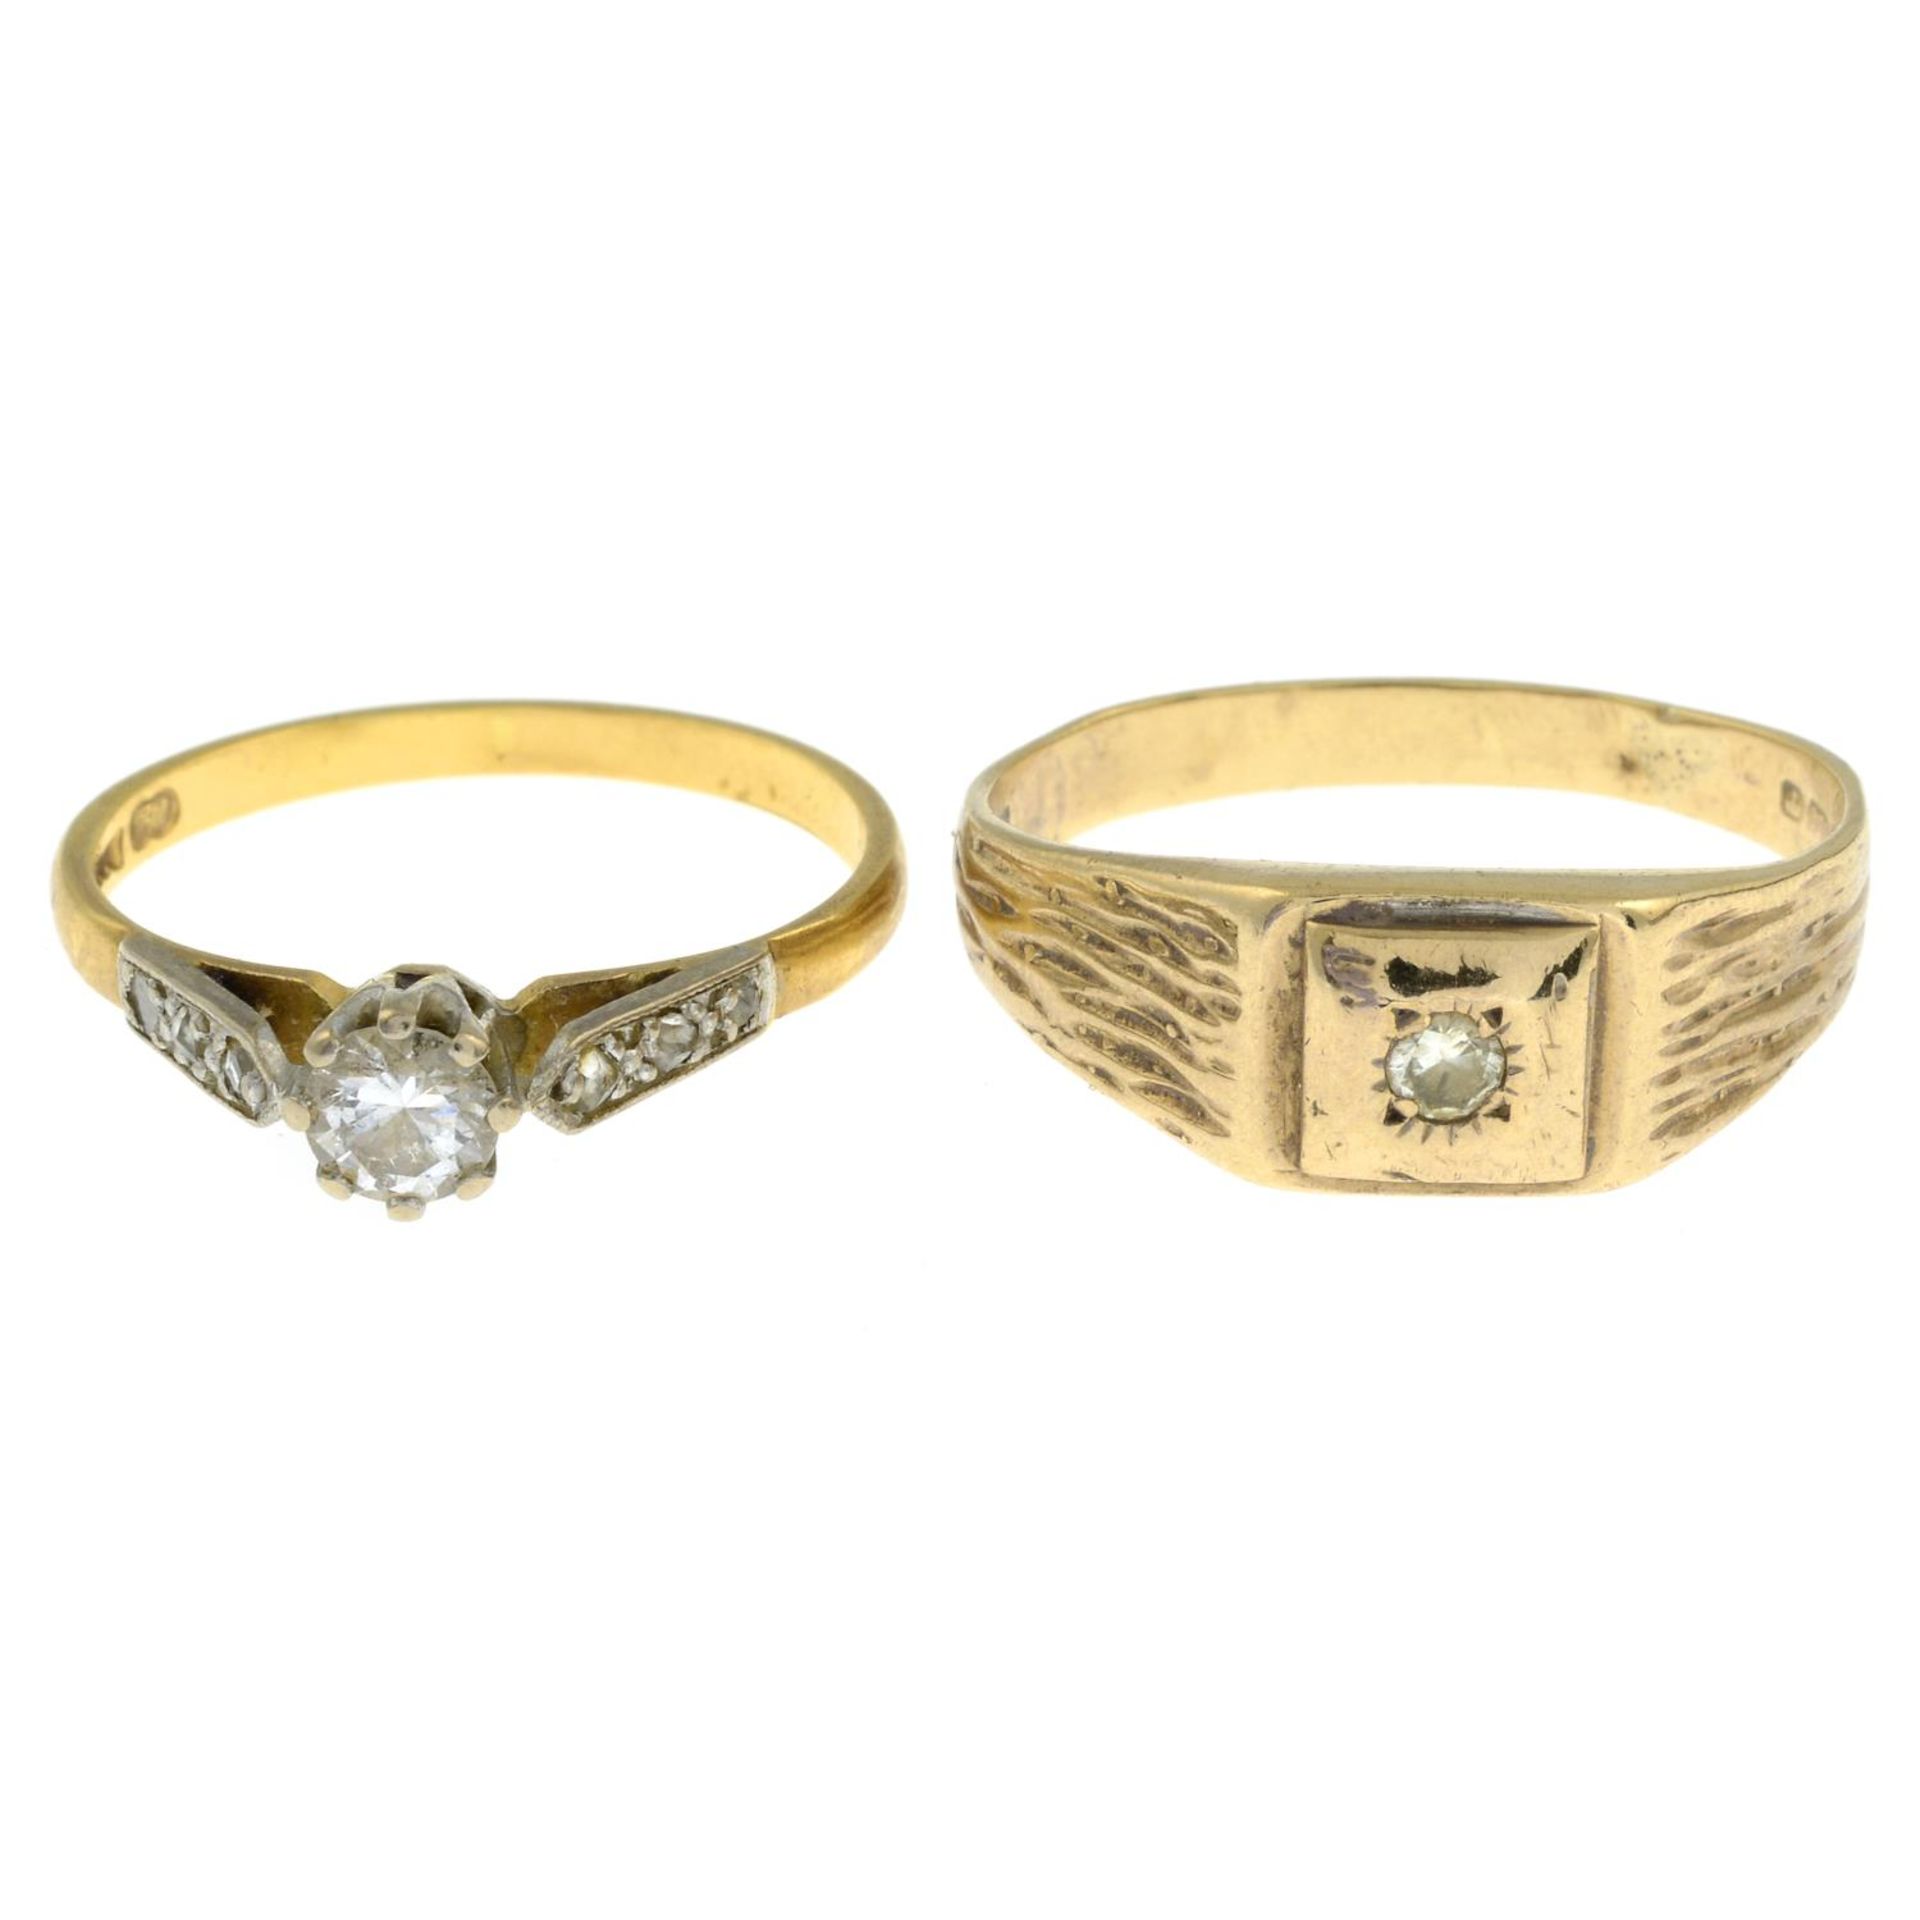 An 18ct gold diamond ring and a 9ct gold diamond ring.